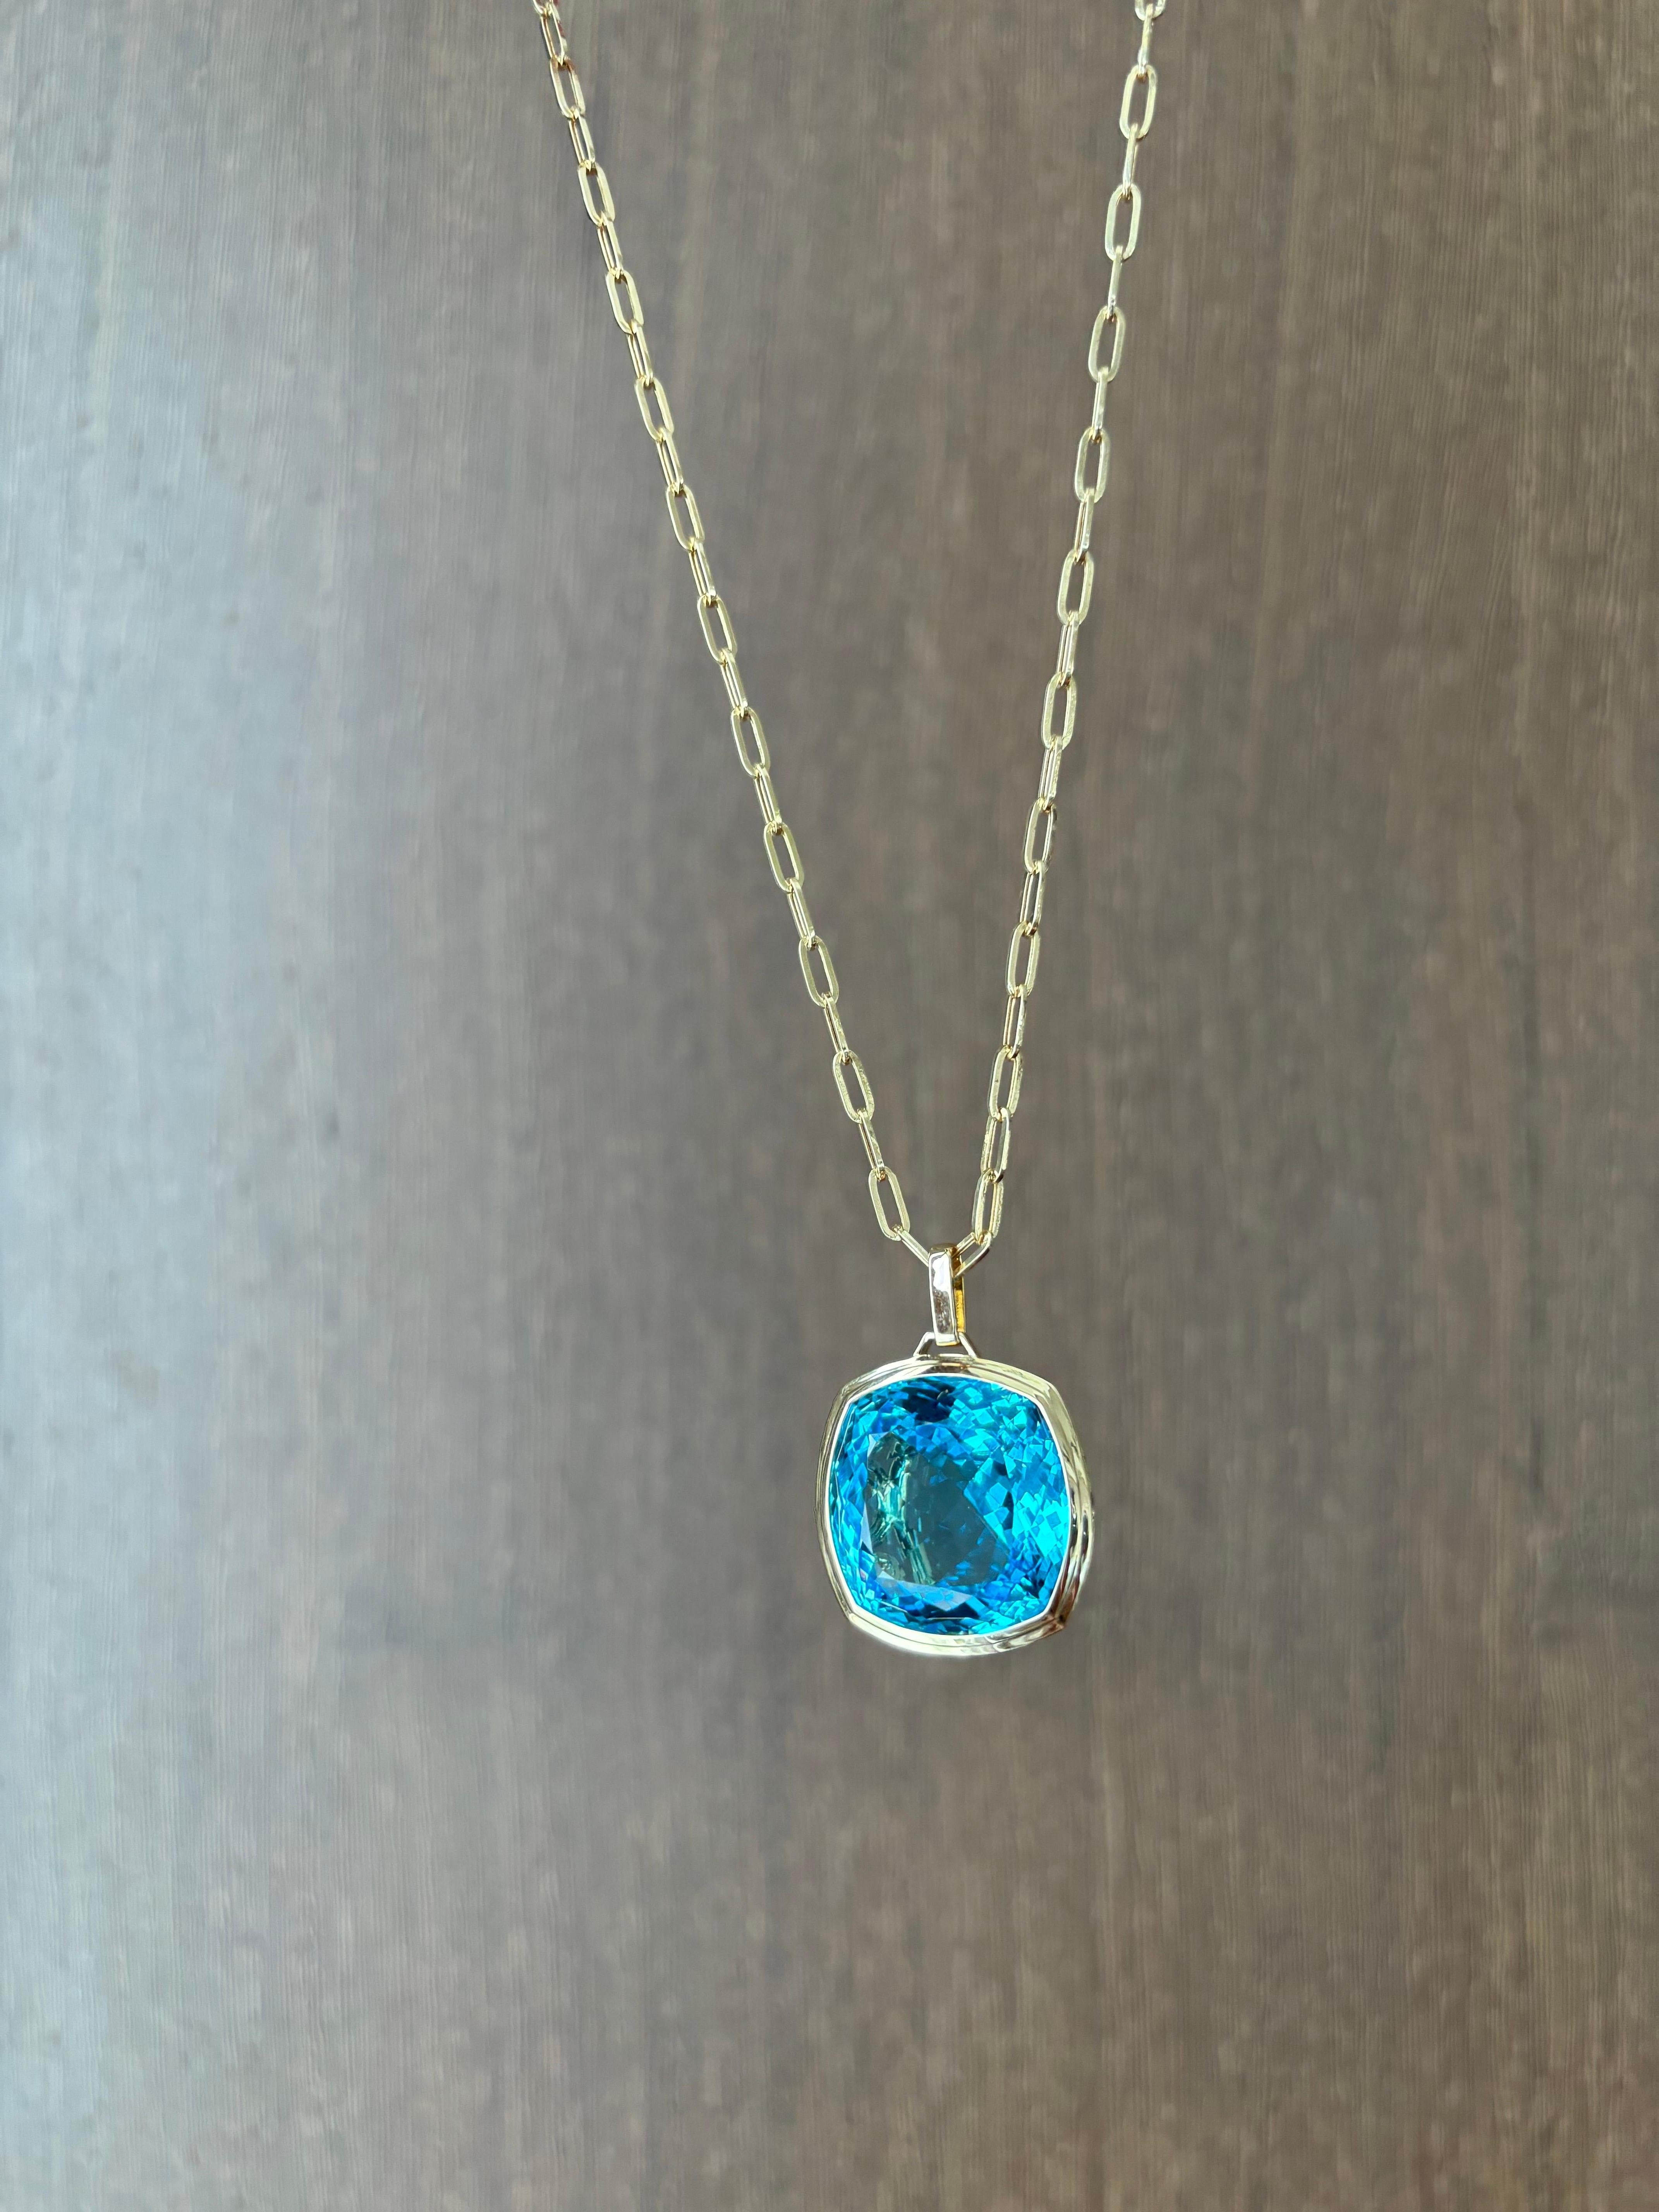 Modern 82.46 Carat Blue Topaz Pendant Necklace with Link Chain For Sale